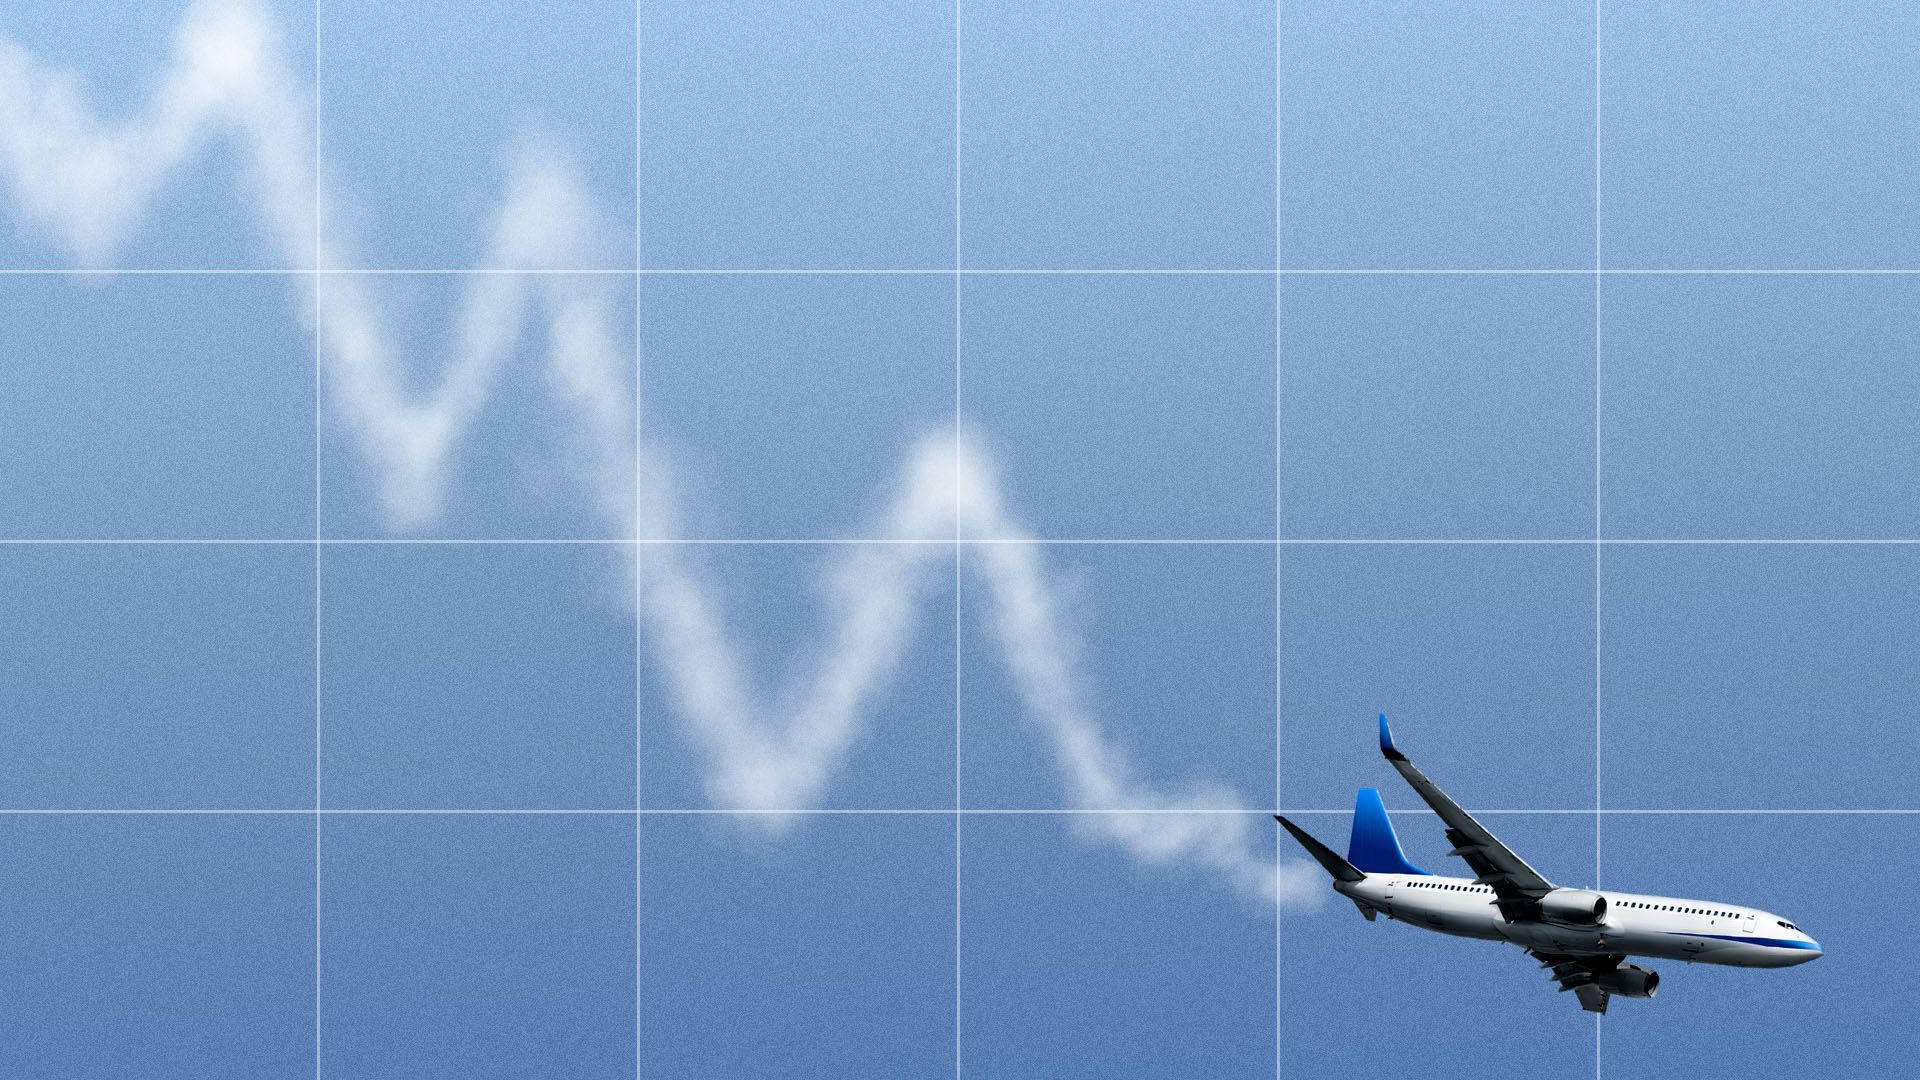 Illustration of an airplane going downards